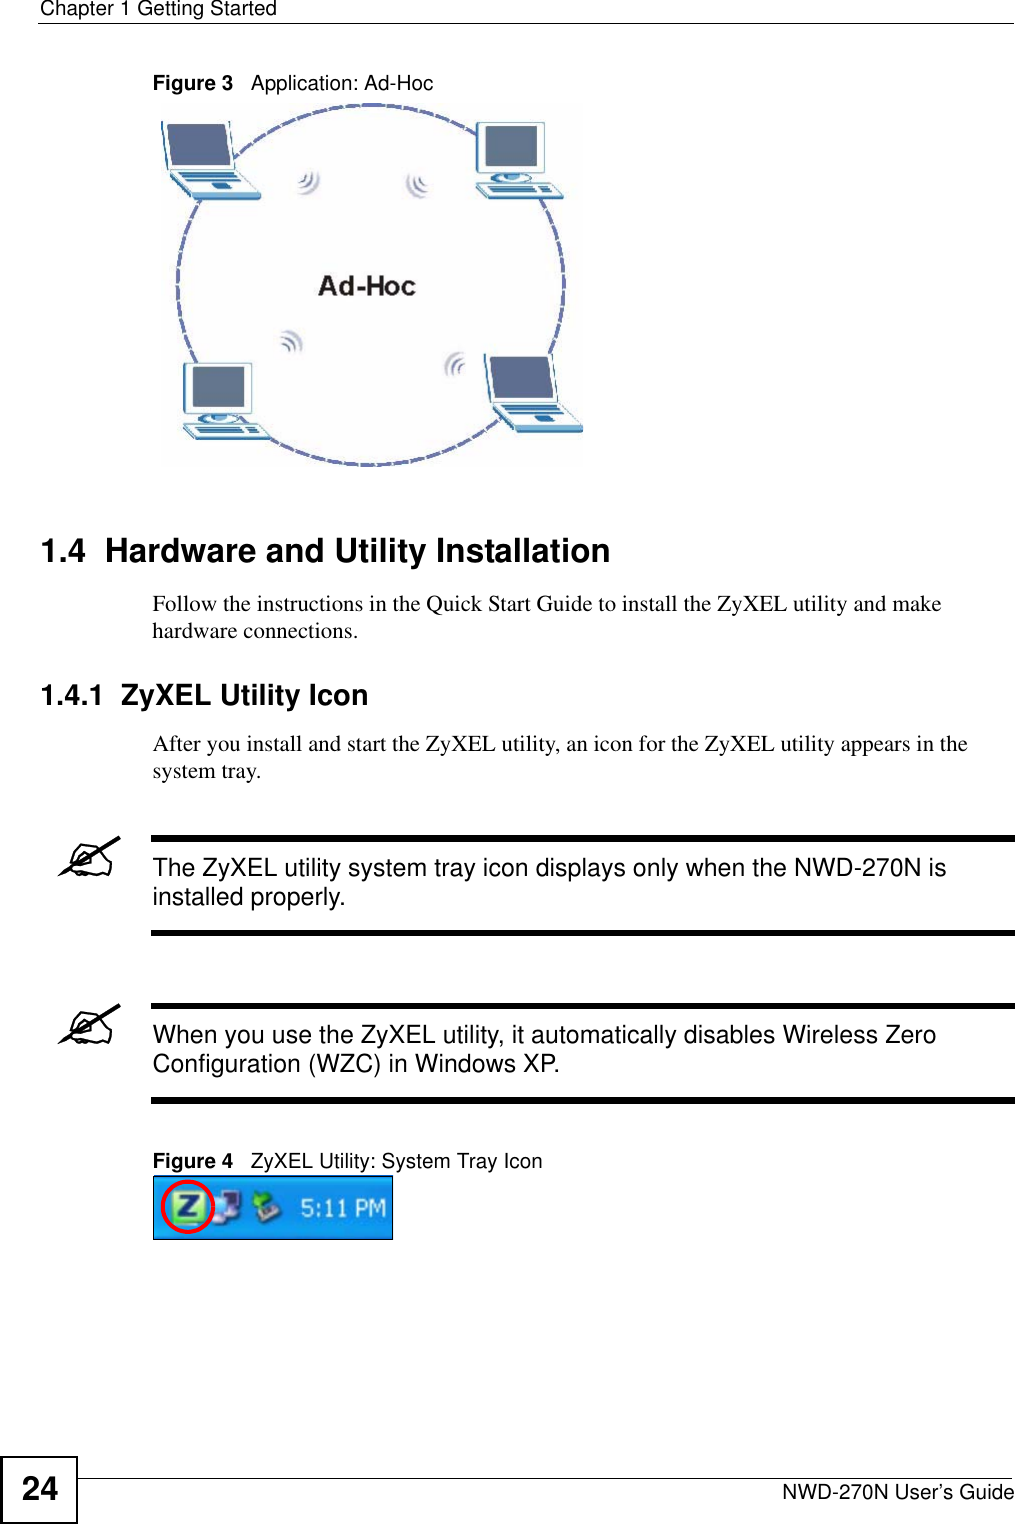 Chapter 1 Getting StartedNWD-270N User’s Guide24Figure 3   Application: Ad-Hoc 1.4  Hardware and Utility InstallationFollow the instructions in the Quick Start Guide to install the ZyXEL utility and make hardware connections.1.4.1  ZyXEL Utility IconAfter you install and start the ZyXEL utility, an icon for the ZyXEL utility appears in the system tray.&quot;The ZyXEL utility system tray icon displays only when the NWD-270N is installed properly.&quot;When you use the ZyXEL utility, it automatically disables Wireless Zero Configuration (WZC) in Windows XP.Figure 4   ZyXEL Utility: System Tray Icon 